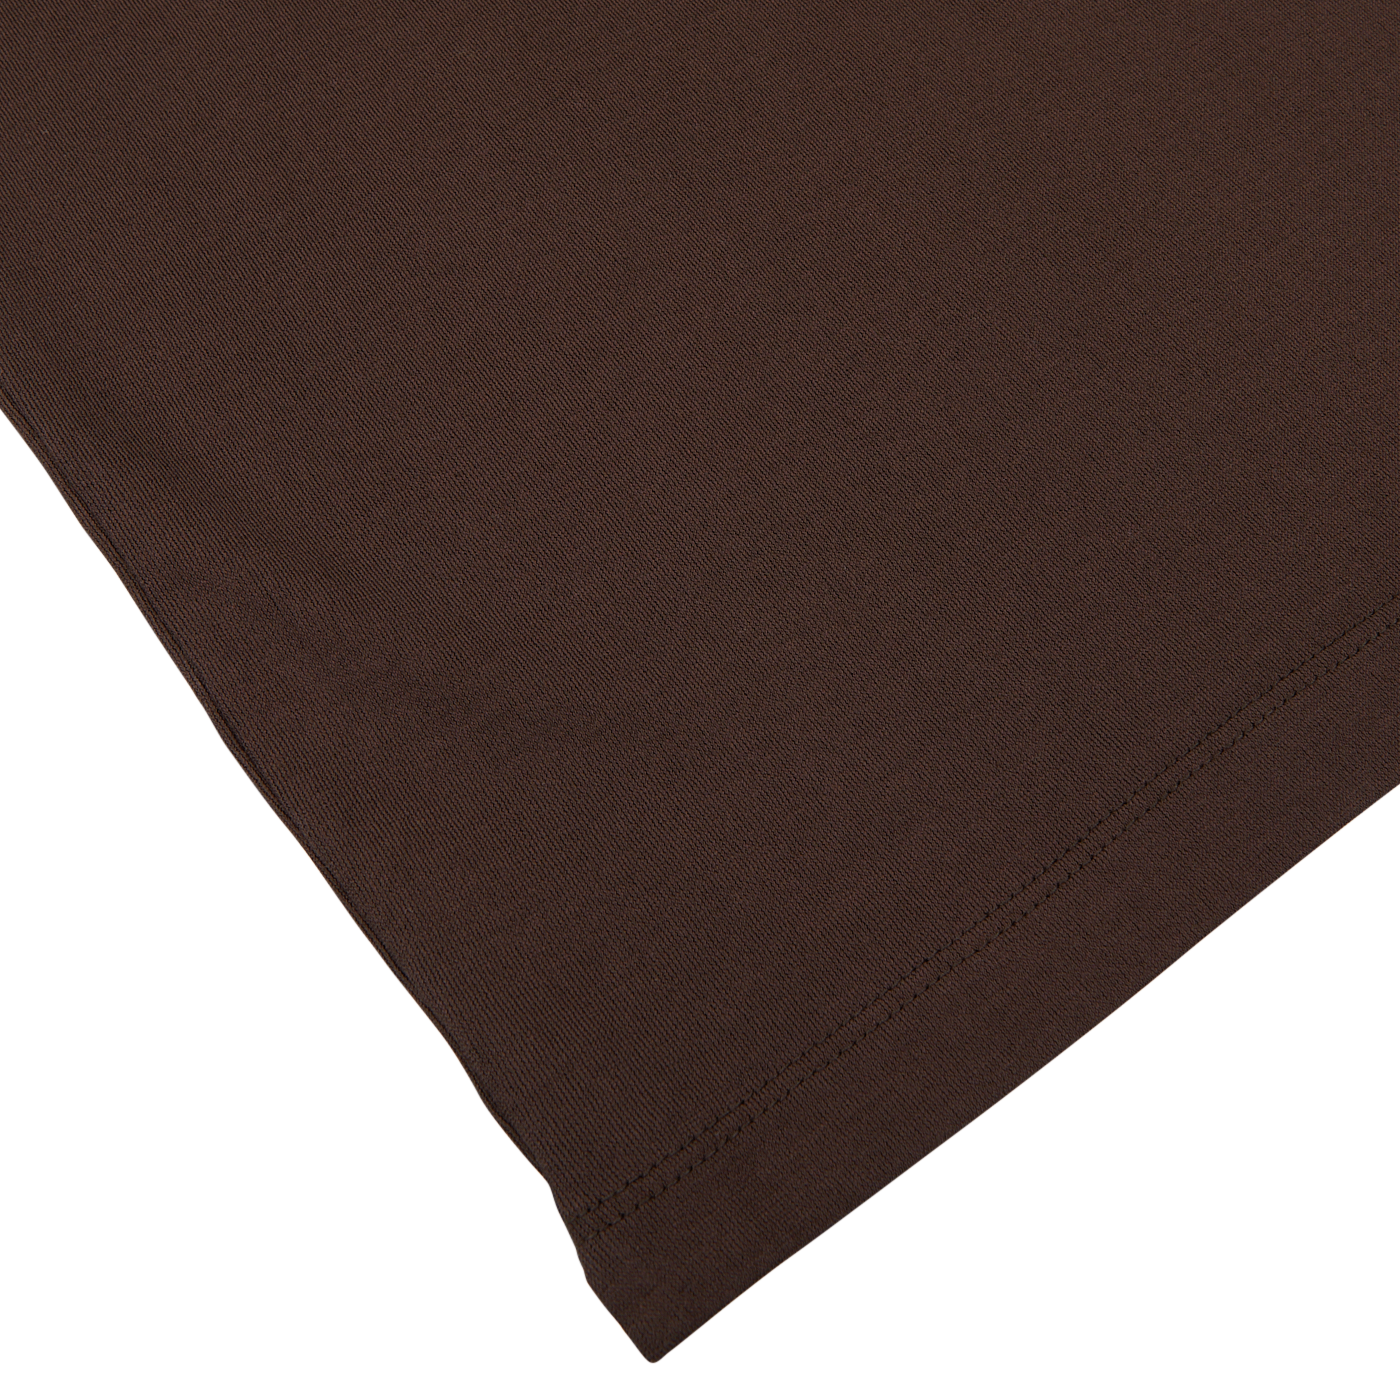 A close-up of a folded dark brown, pure cotton Altea Capri Collar Polo Shirt with visible stitching on a white surface.